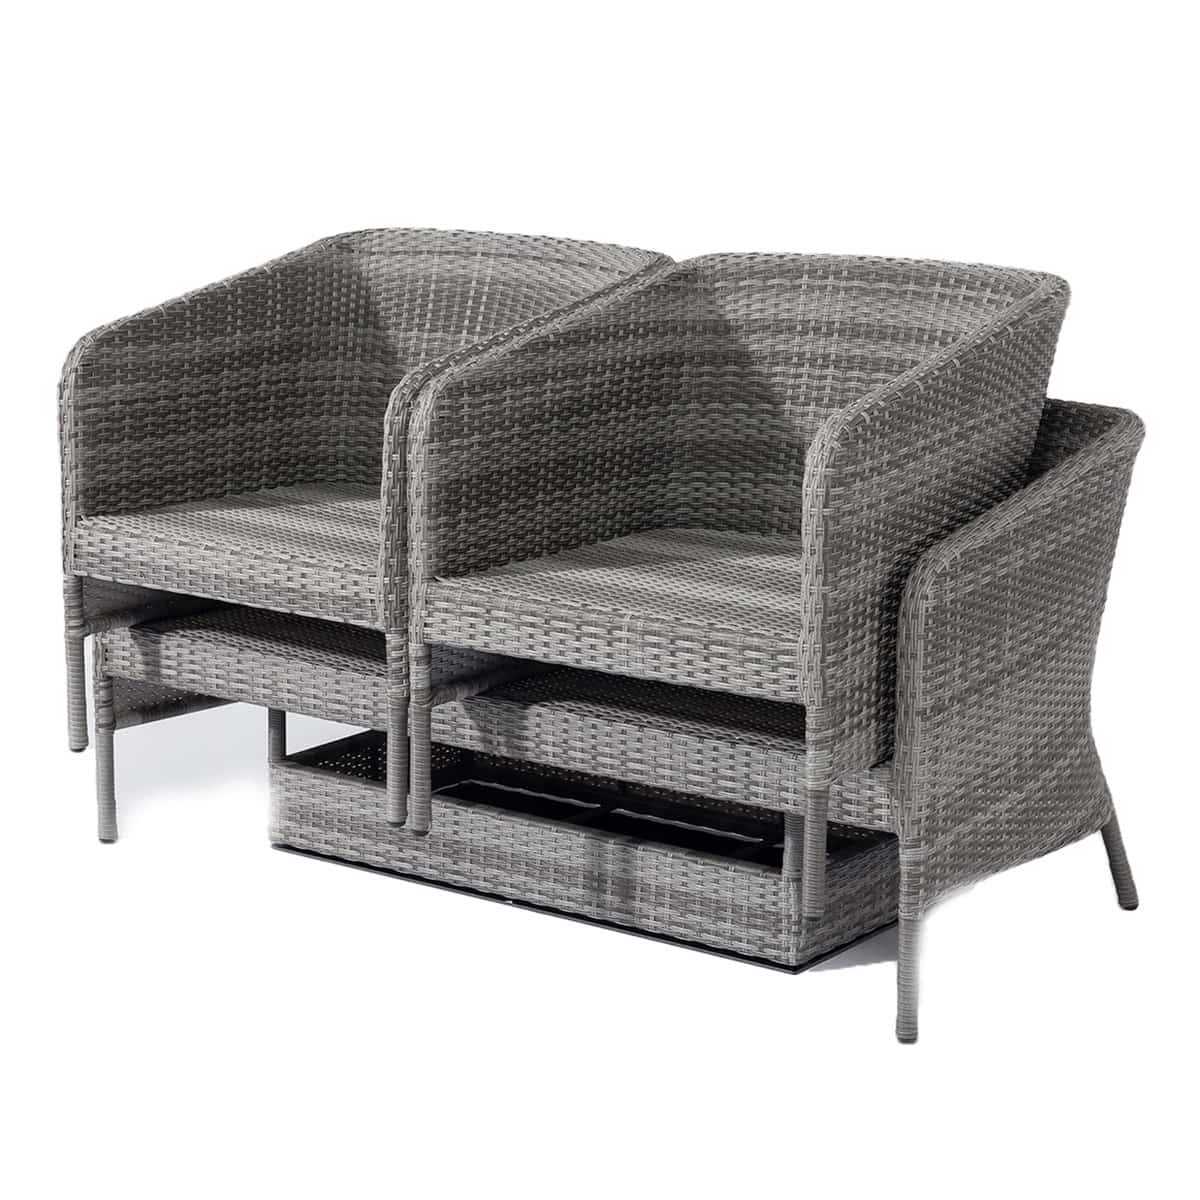 Grey rattan 2 seat sofa set with two chairs and coffee table